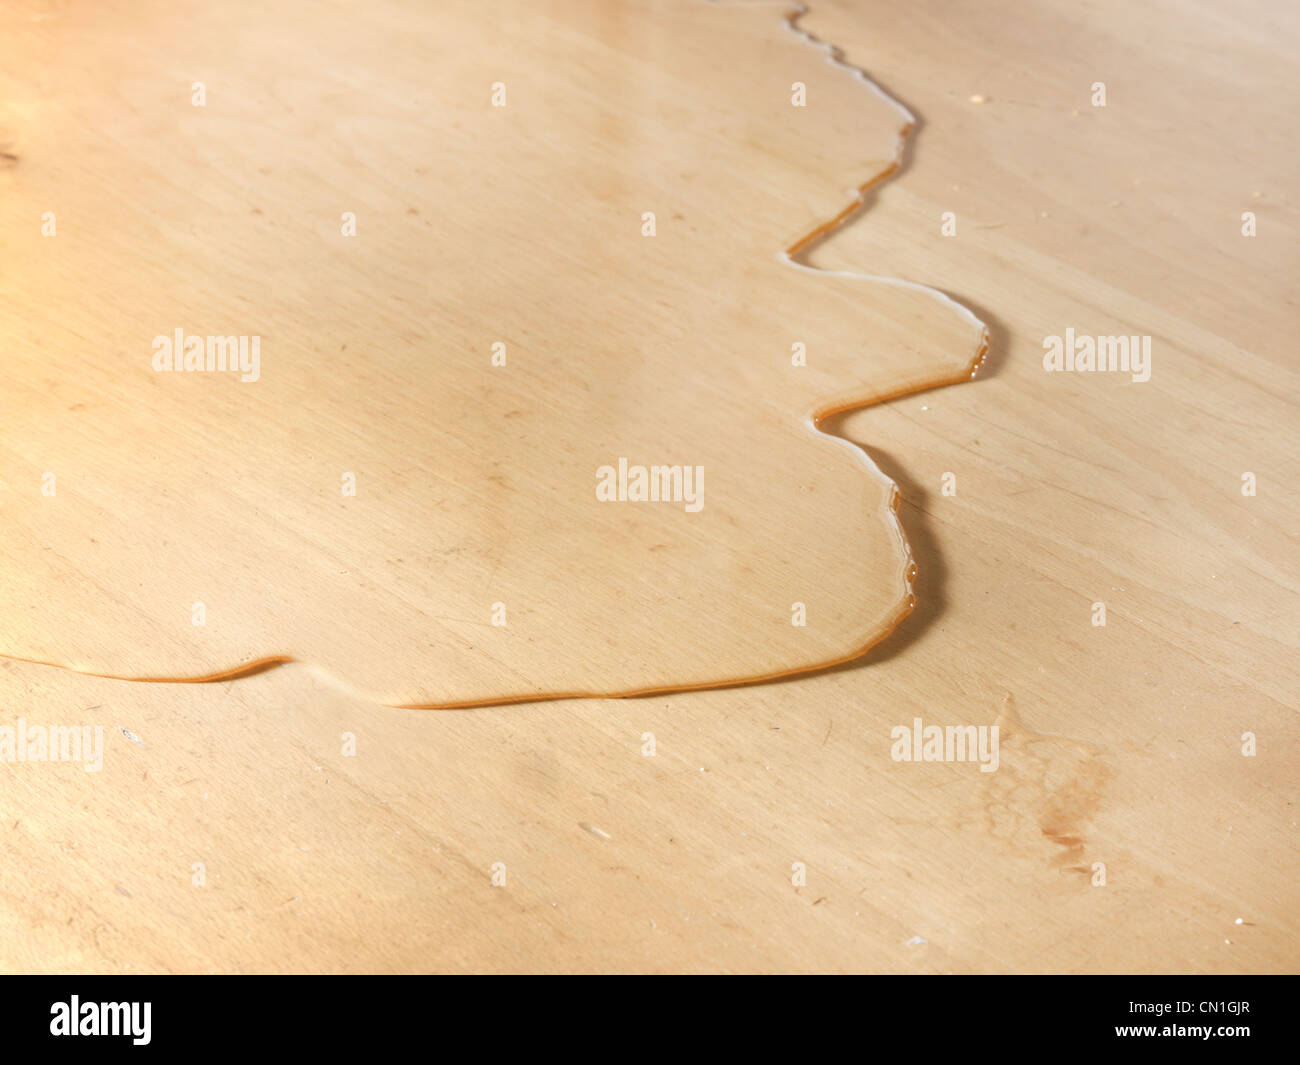 Small Pool of Water On A Work Surface Stock Photo